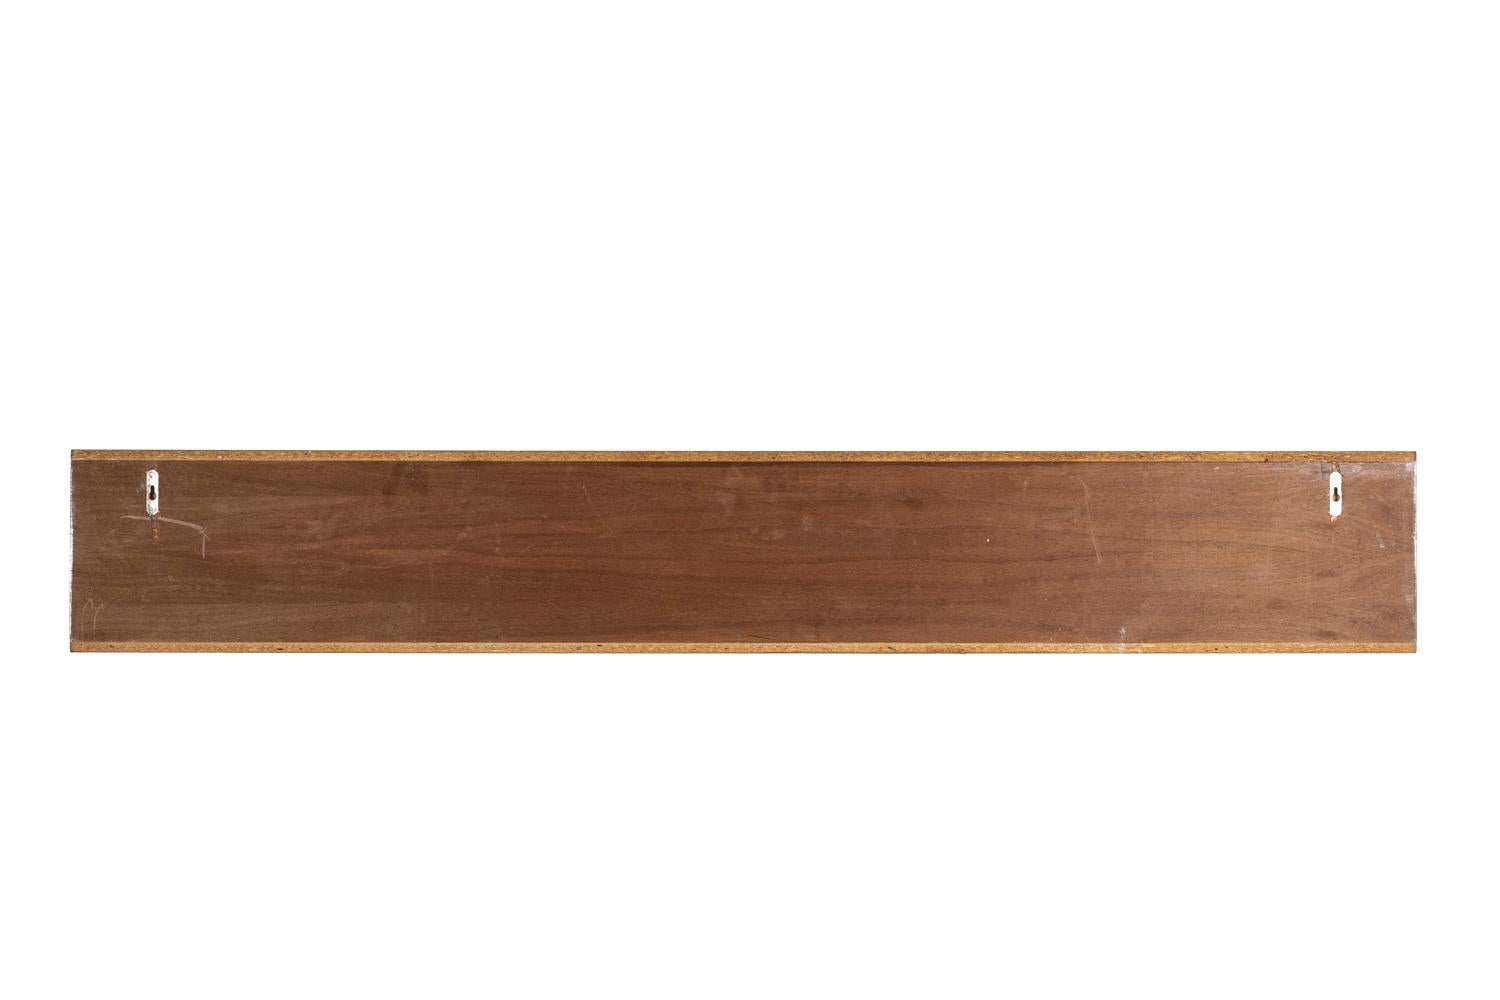 Teak wall shelf for placing books or objects in the center or above, rectangular in shape.

Dutch work realized in the 1970s.